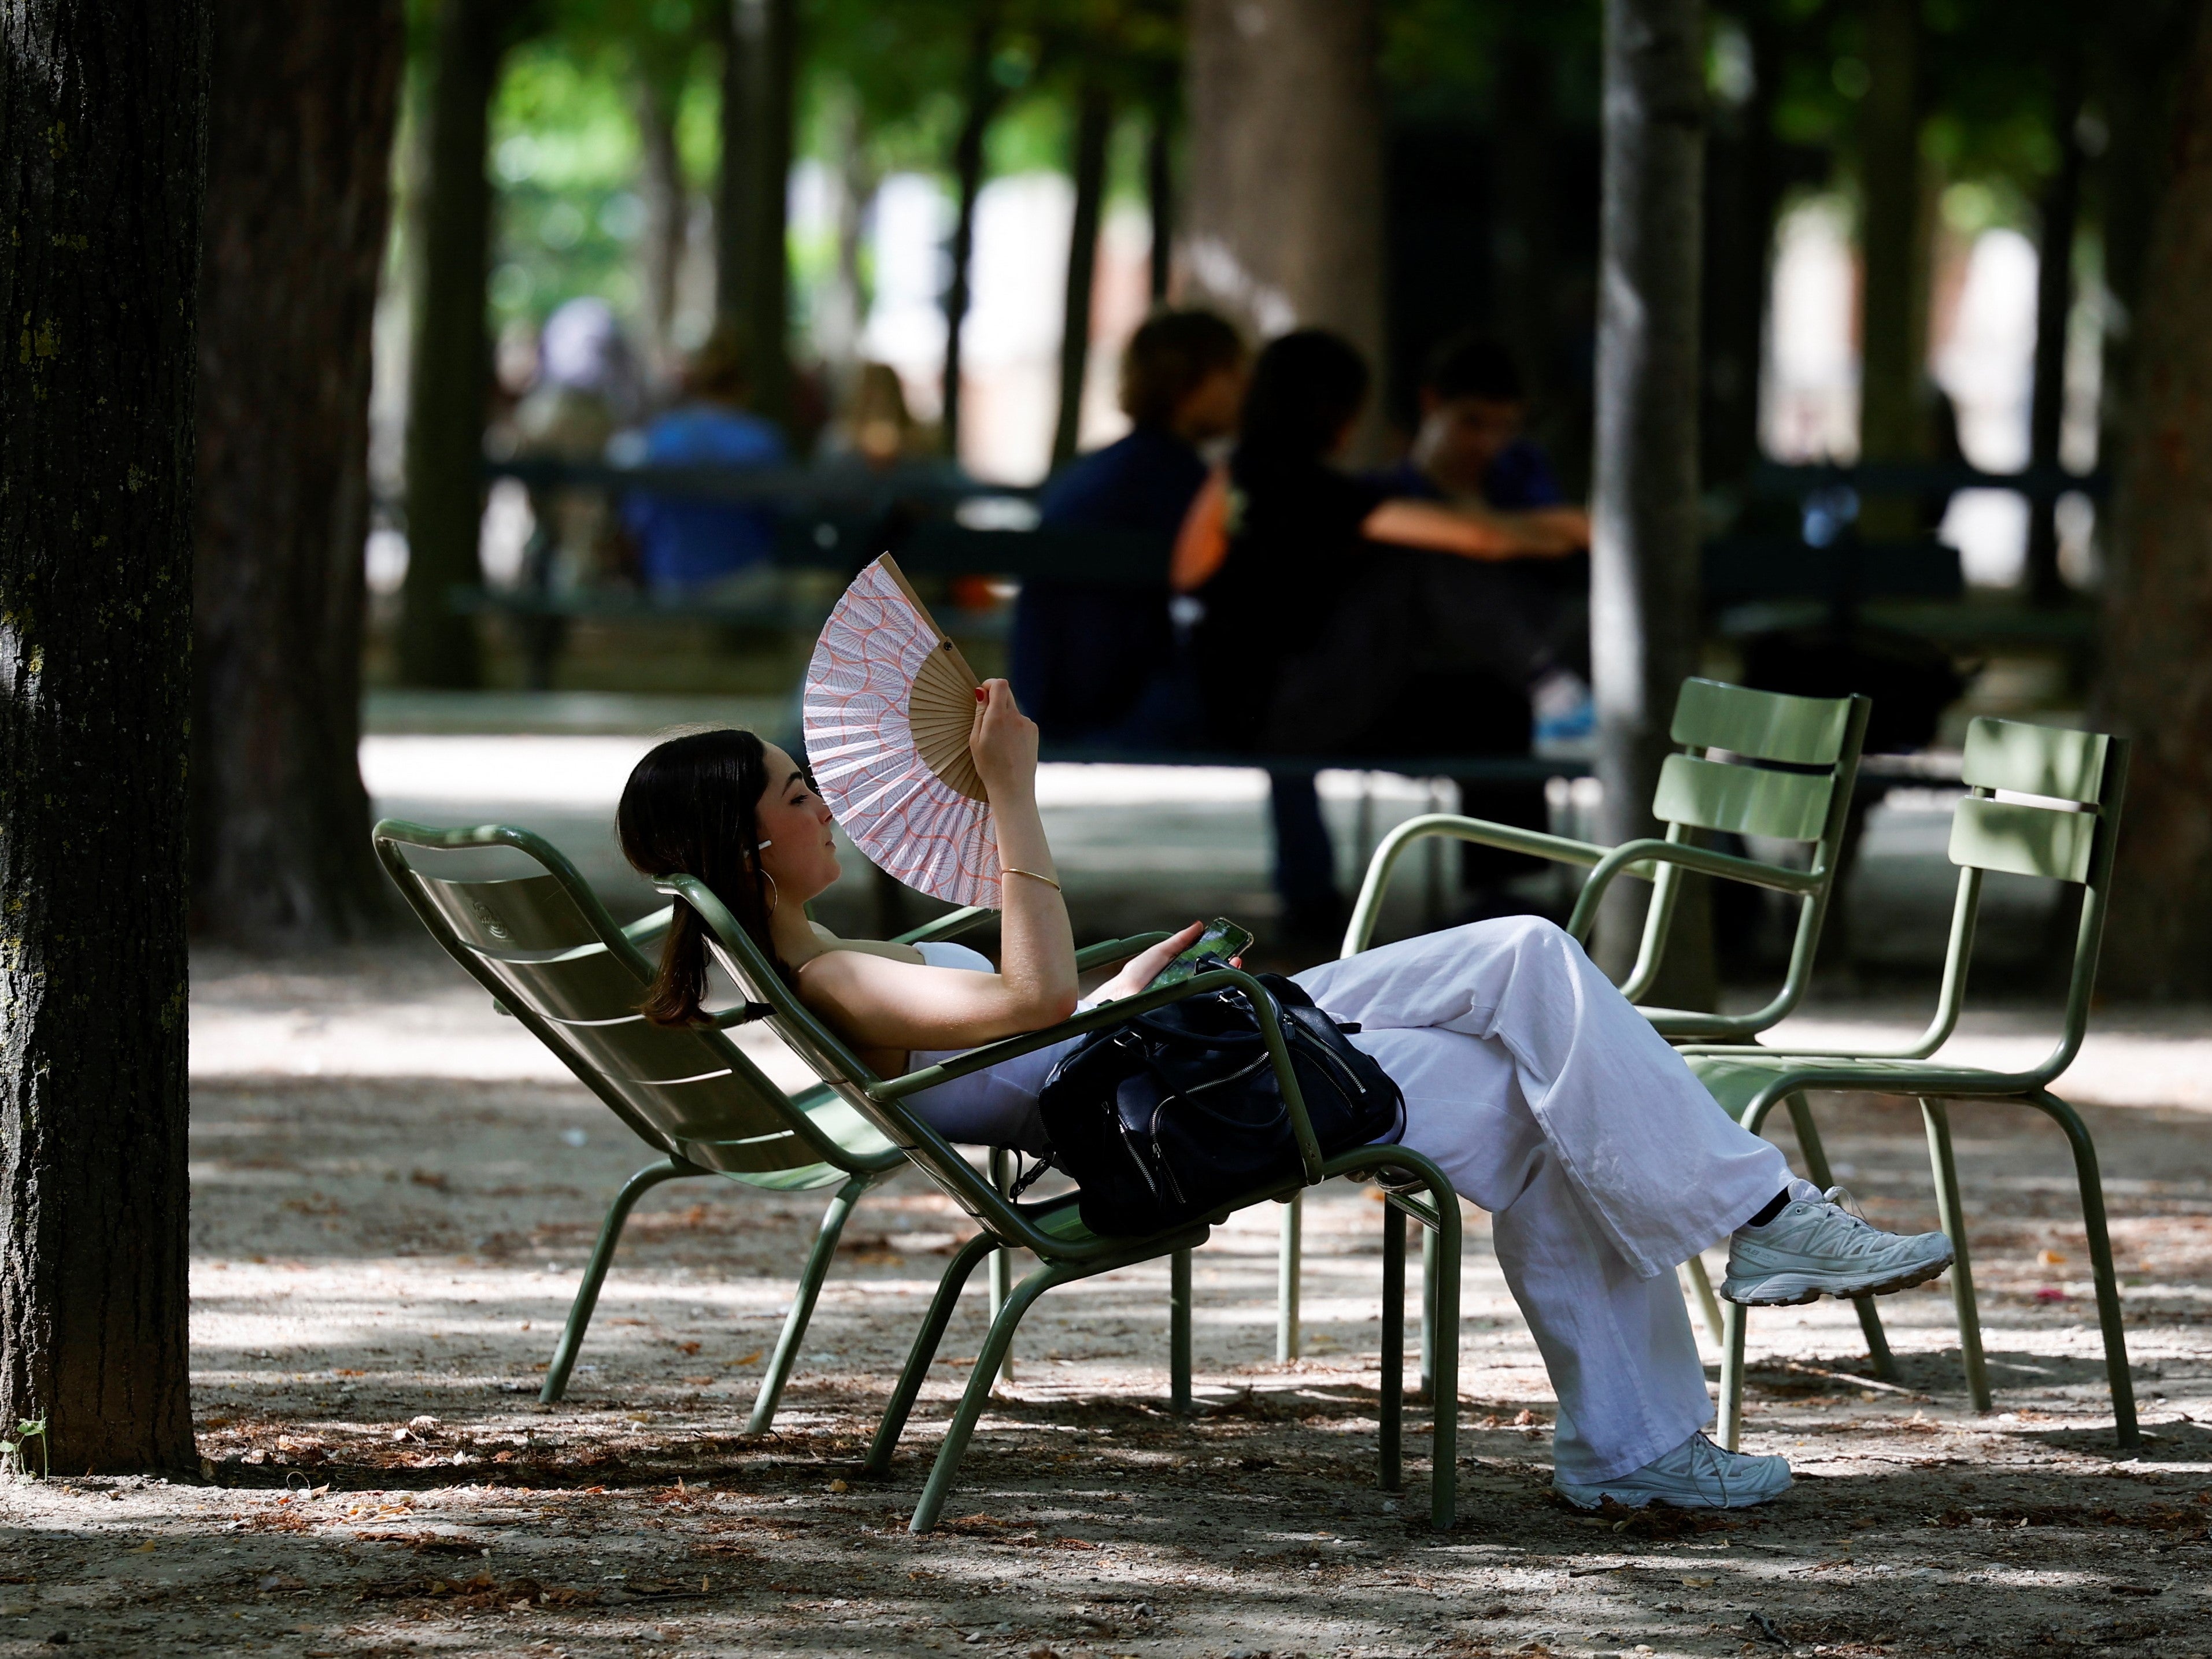 A woman uses a fan to cool down at the Luxembourg Gardens in Paris as an early heatwave hits the country